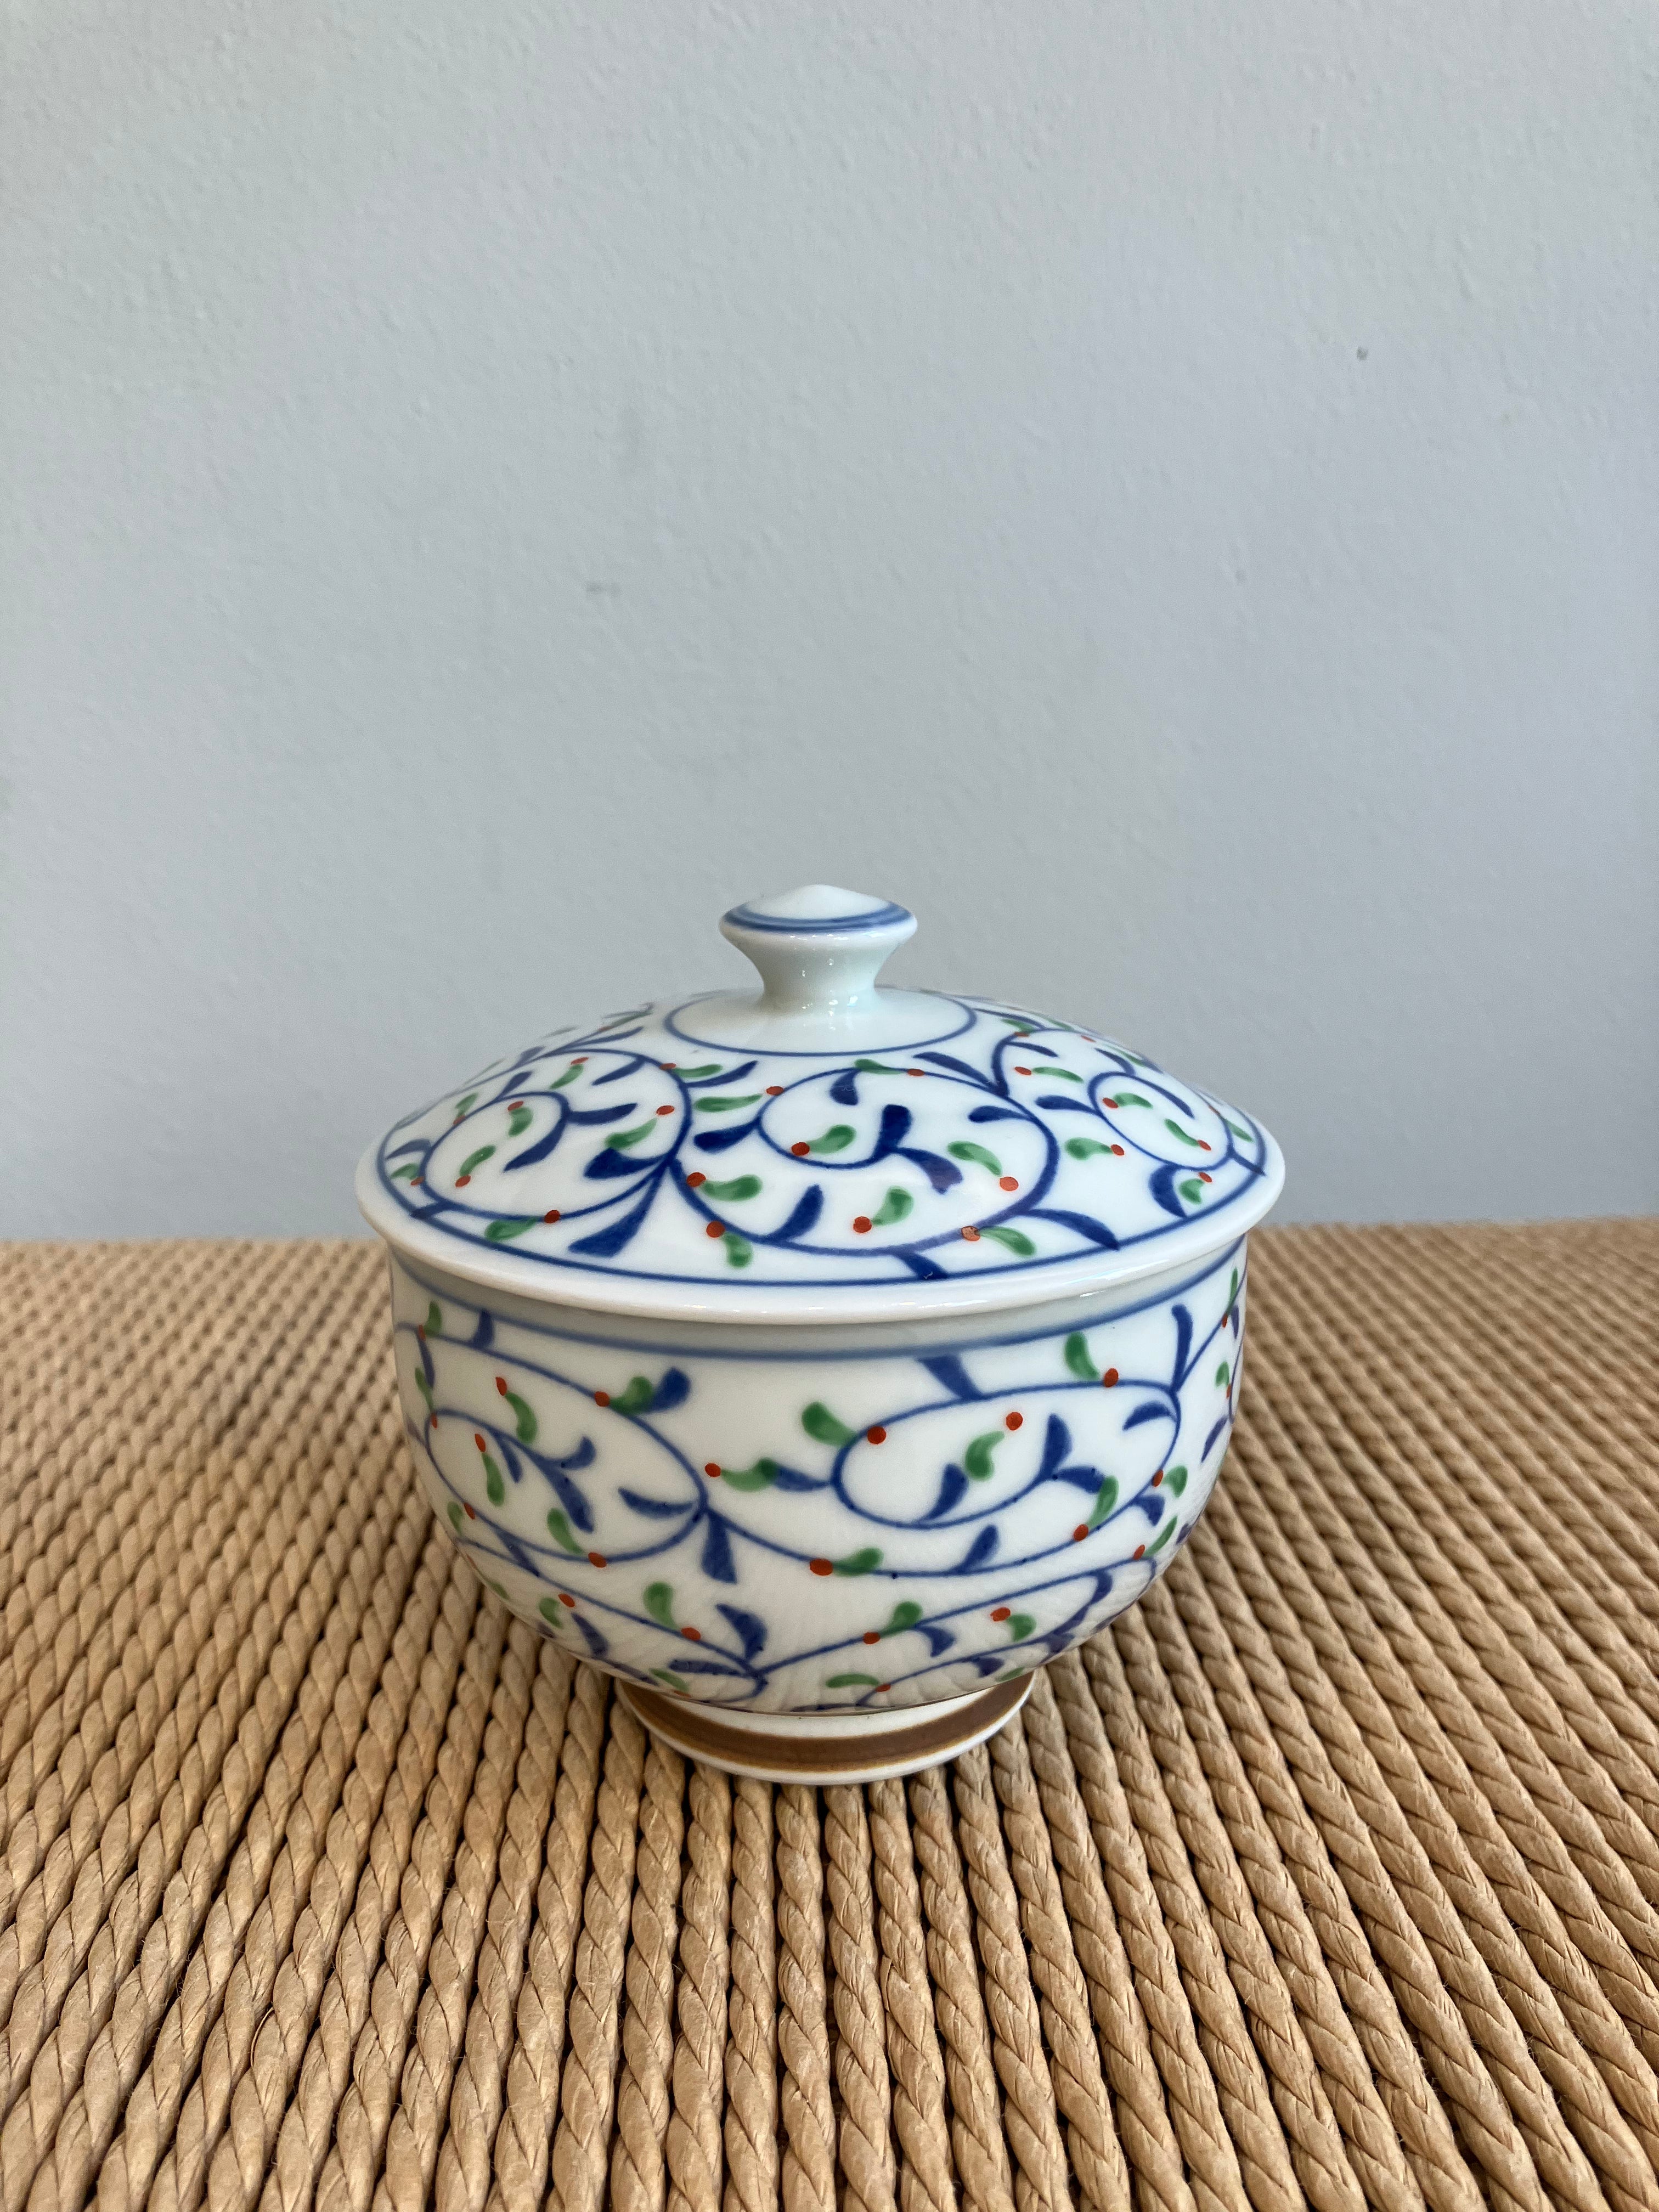 Lidded jar with pattern of leaves in blue, green and red